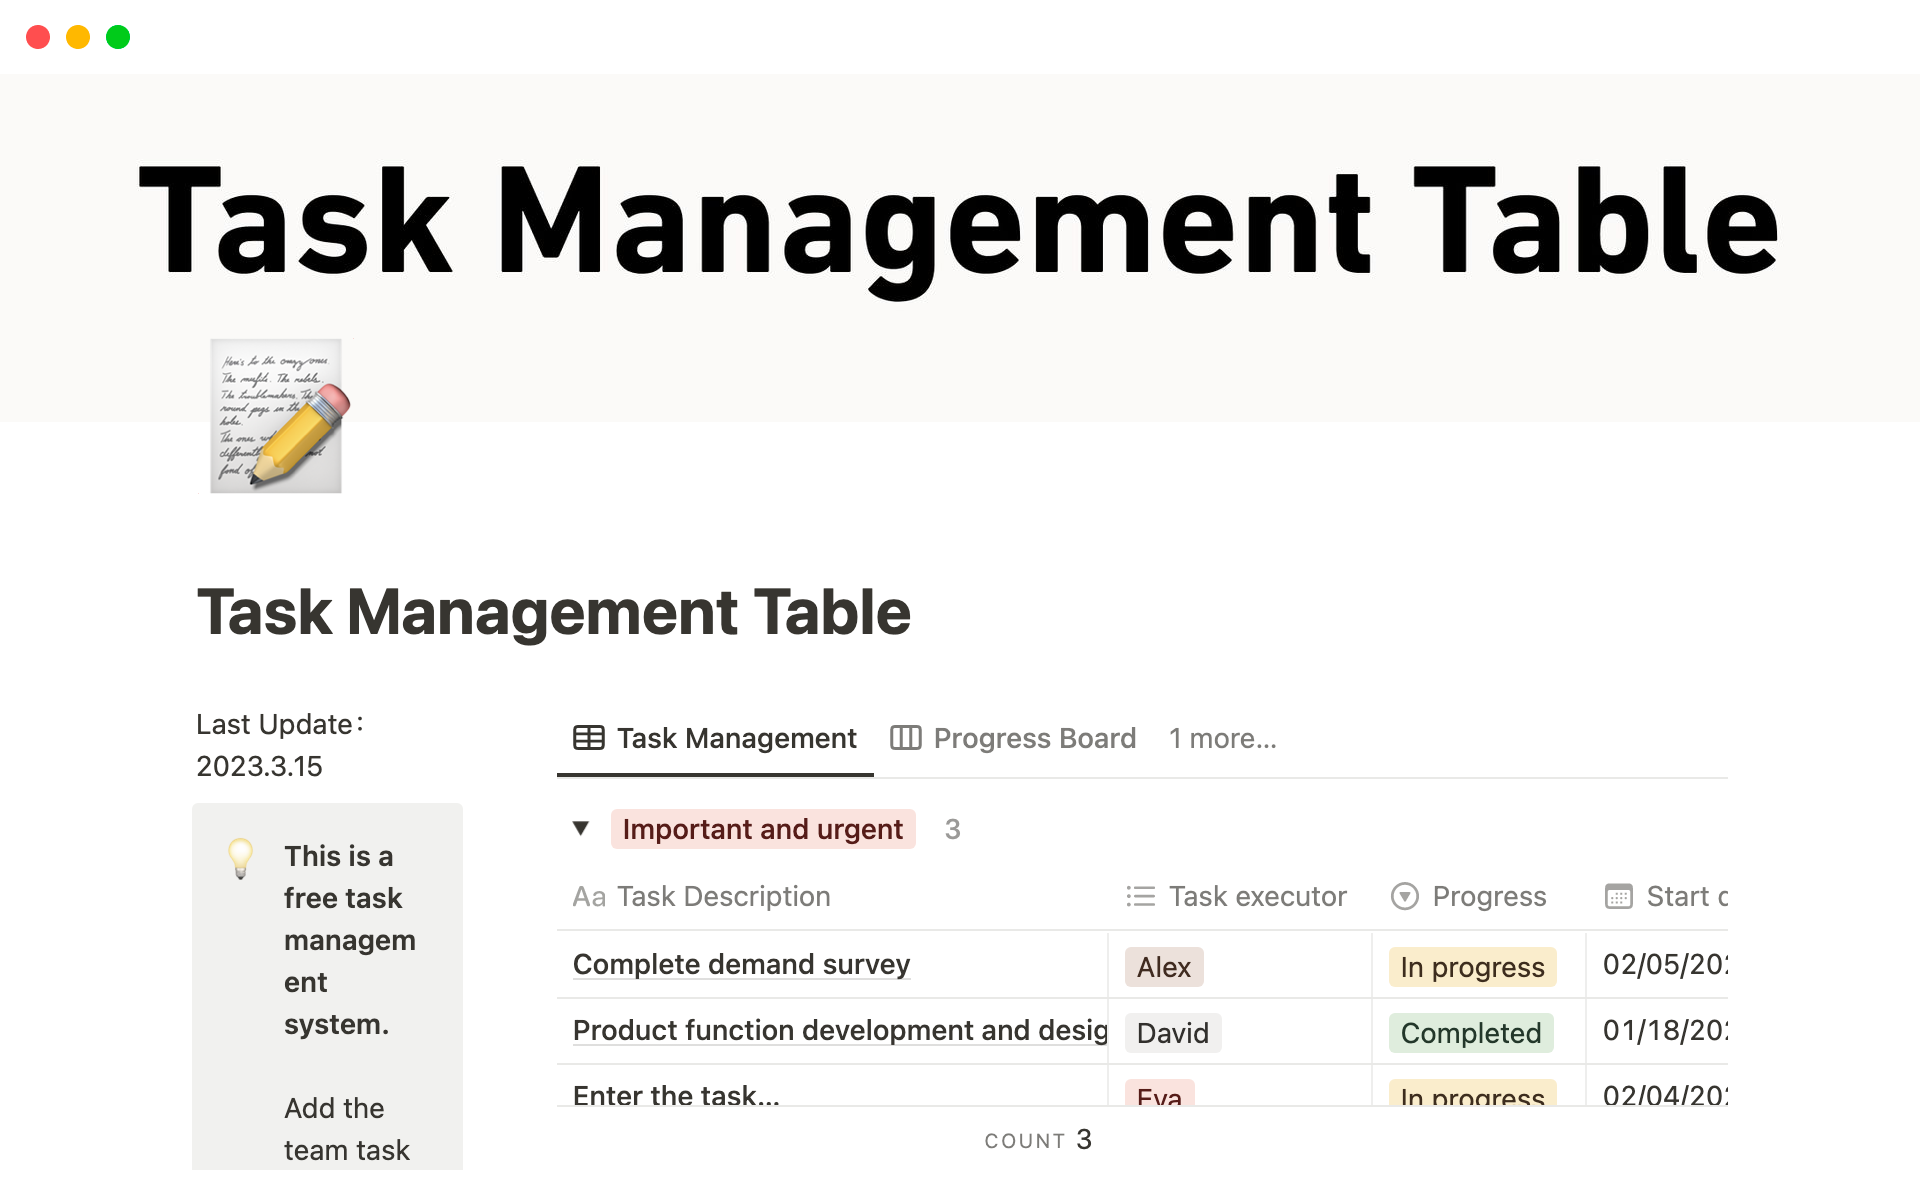 This is a free task management system.